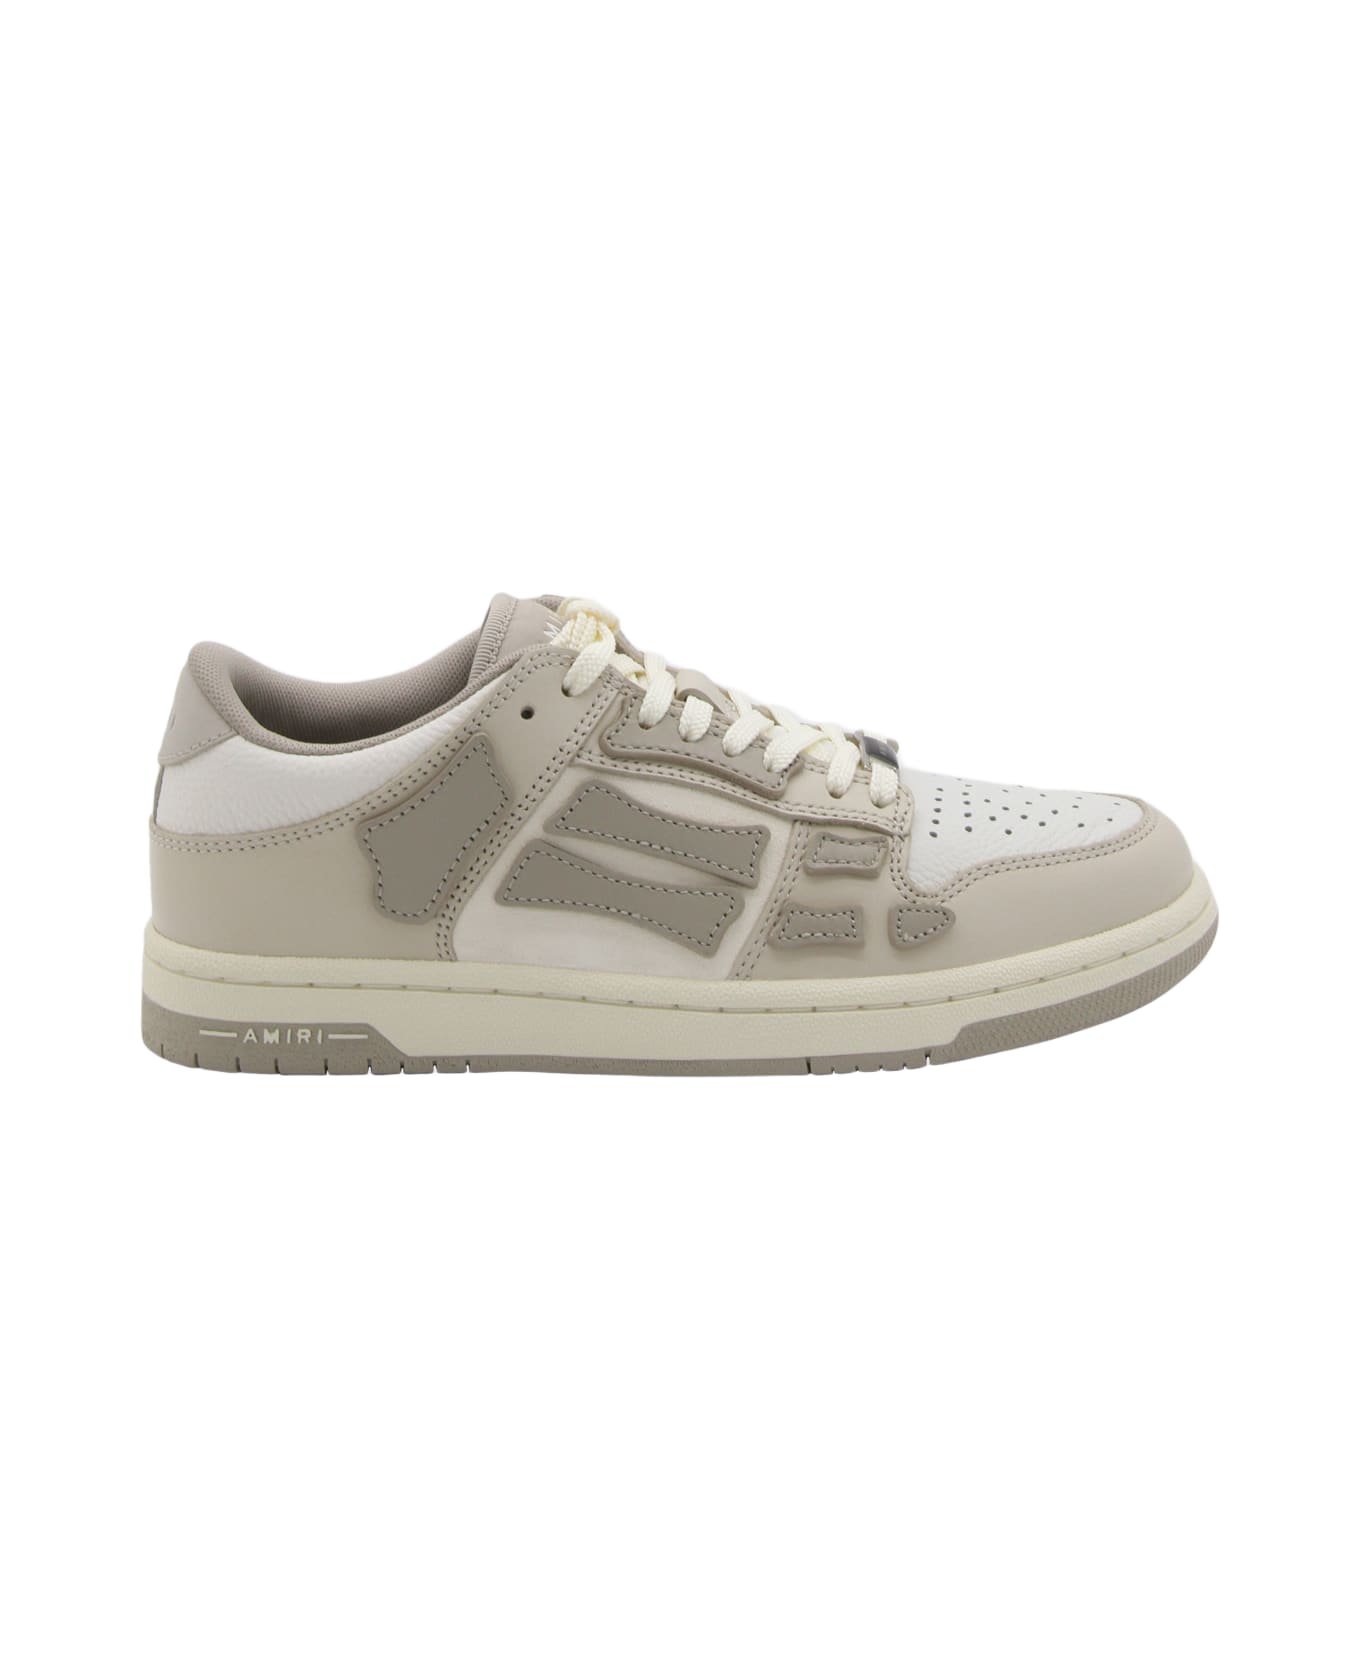 AMIRI White And Grey Leather Sneakers - ALABASTER スニーカー